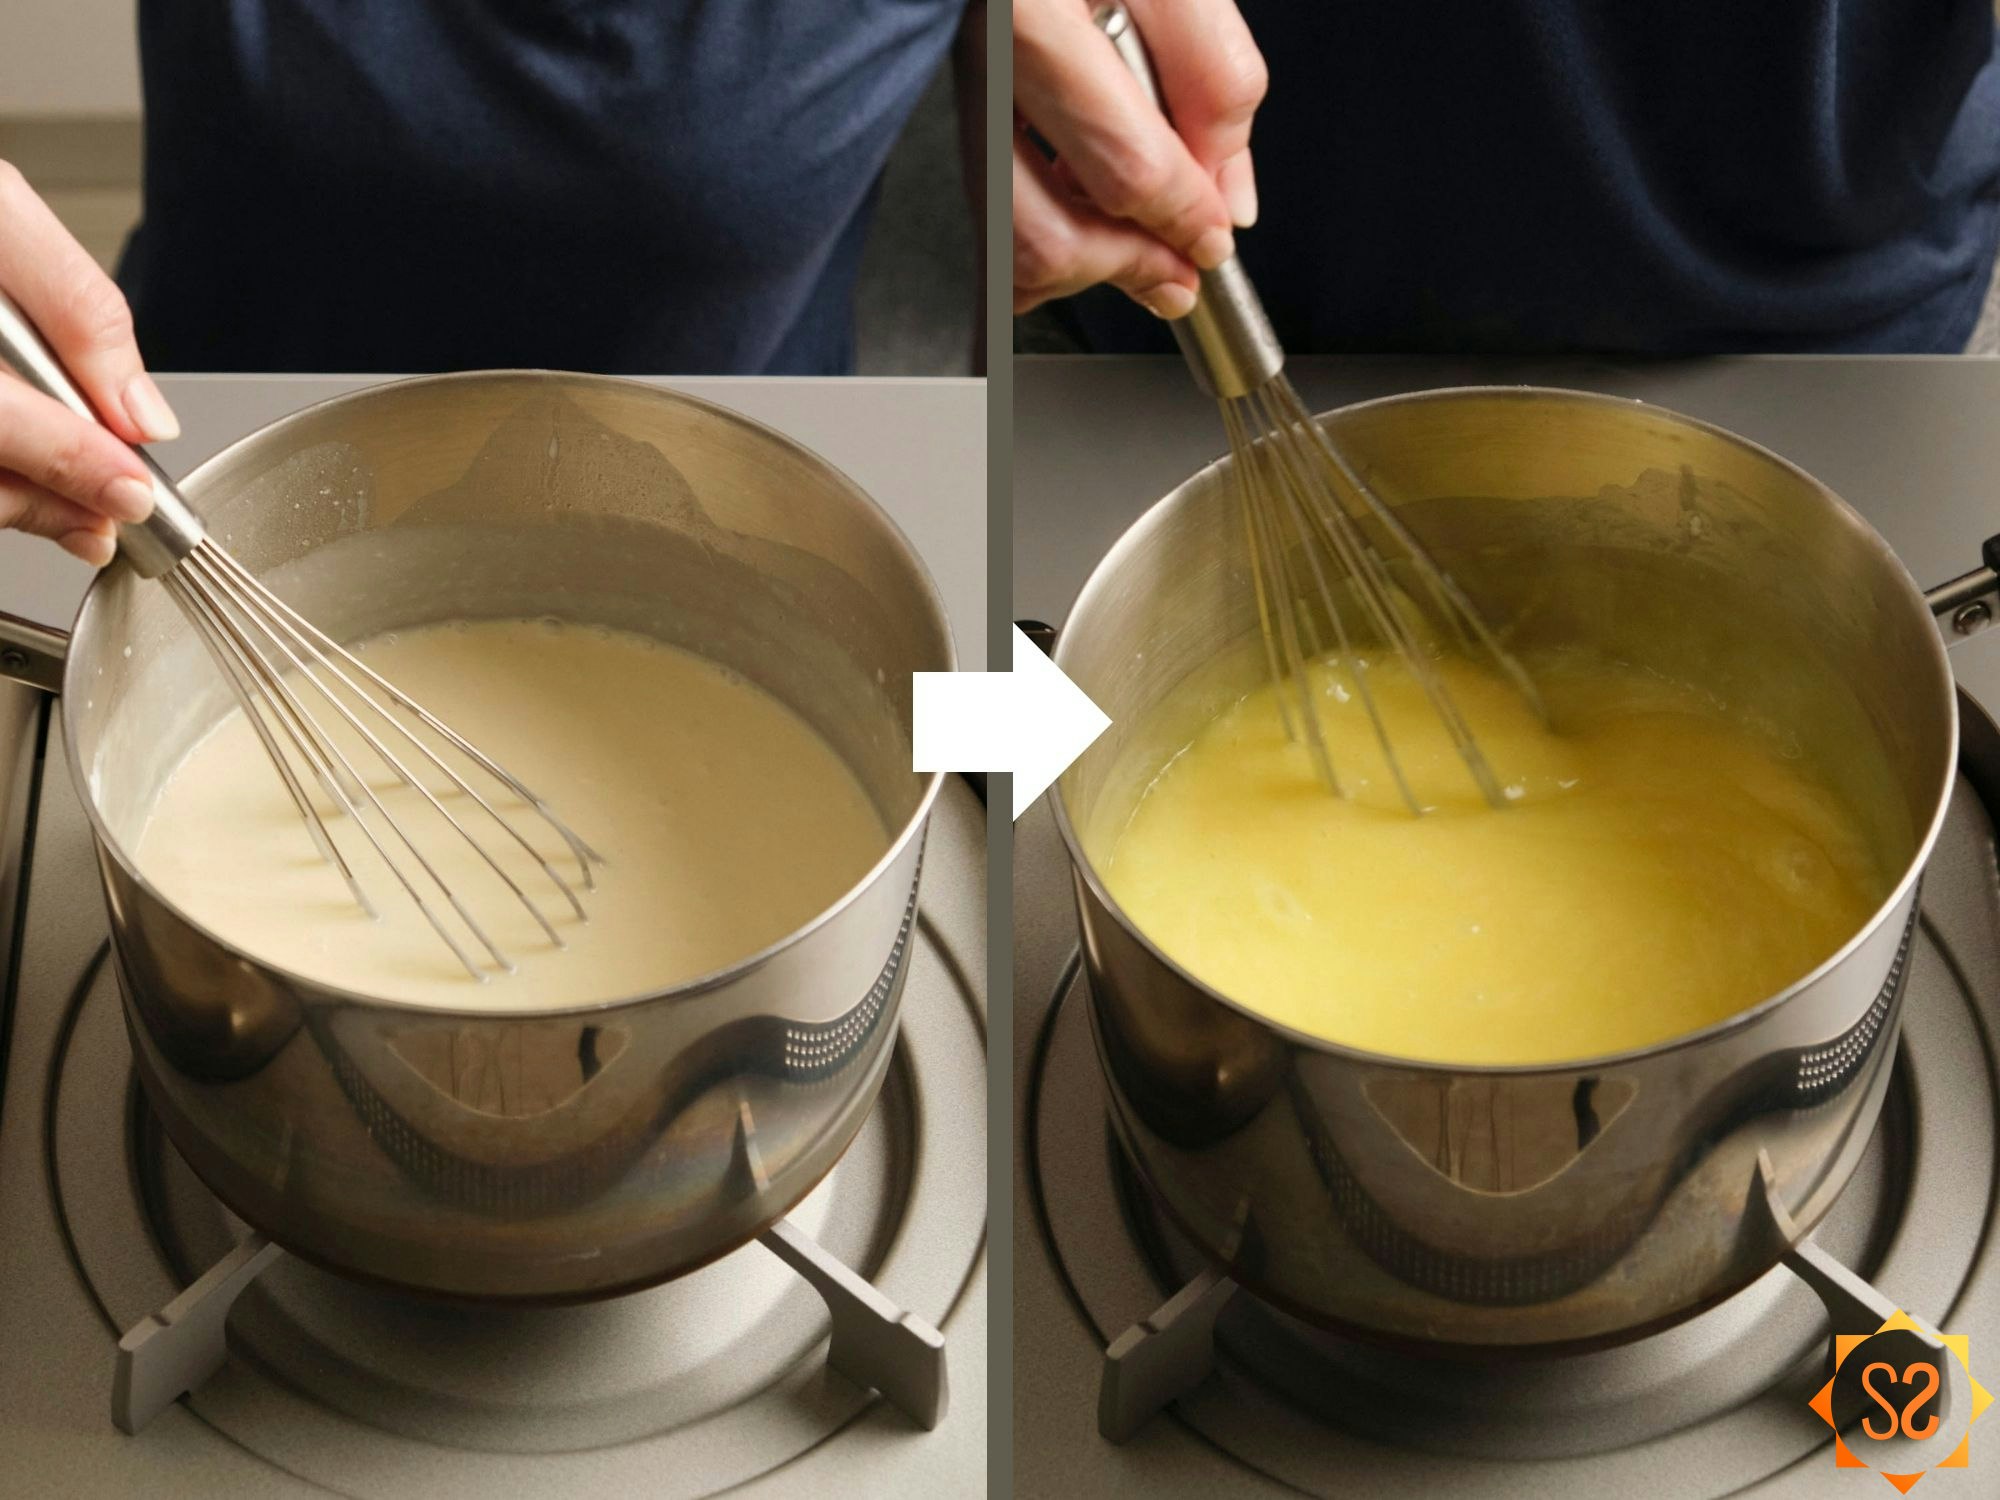 Two images showing the Key lime filling before and after heating.